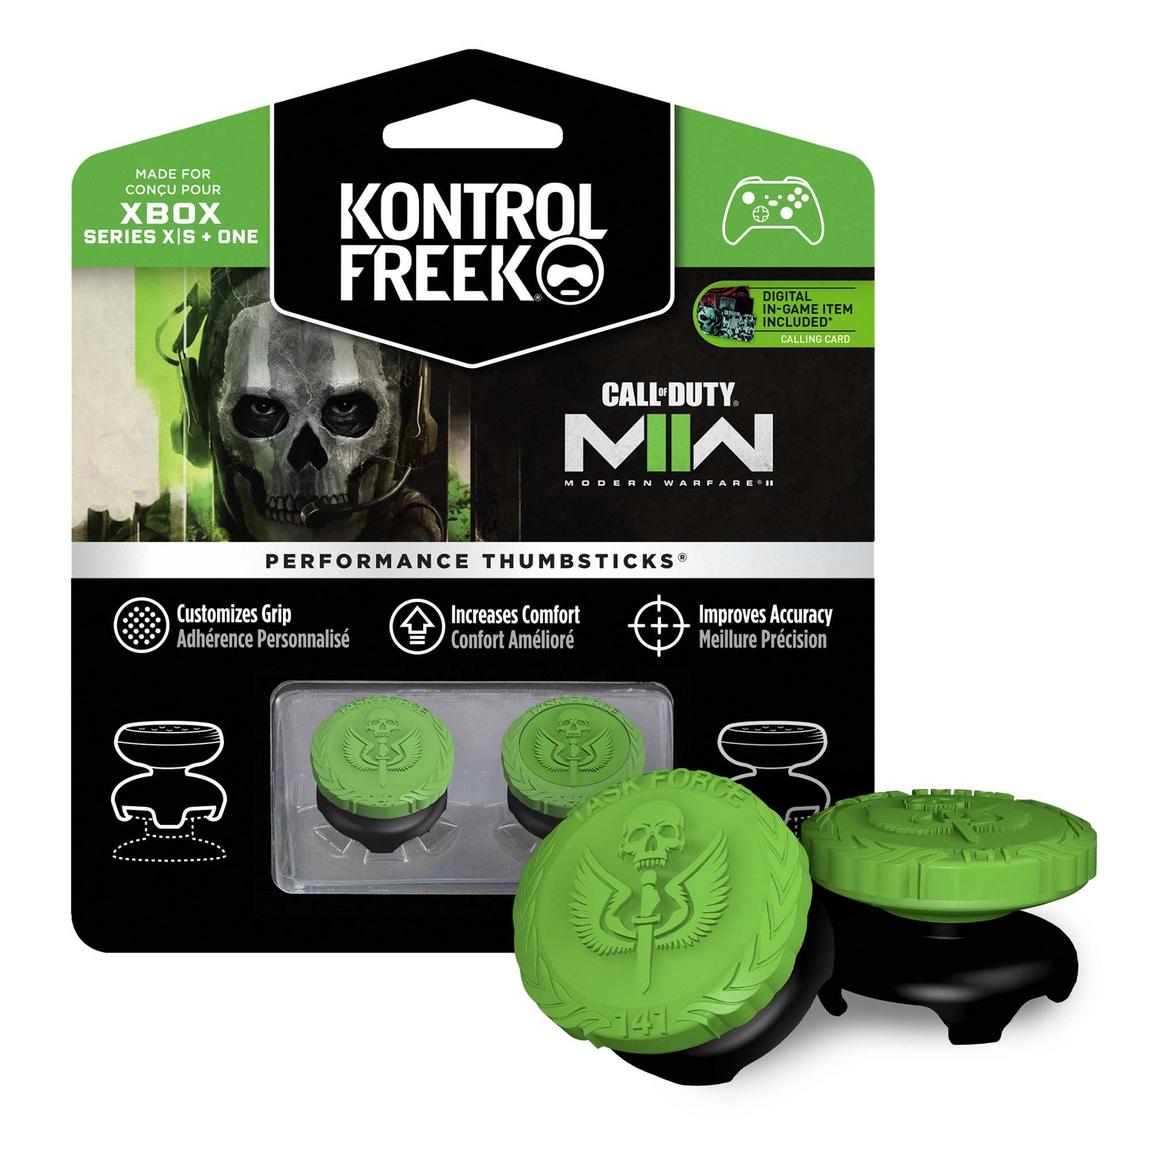 Picture of SteelSeries 2596-XBX KontrolFreek Call of Duty Modern Warfare 2 Performance Thumbsticks for Xbox Series X-S & Xbox One